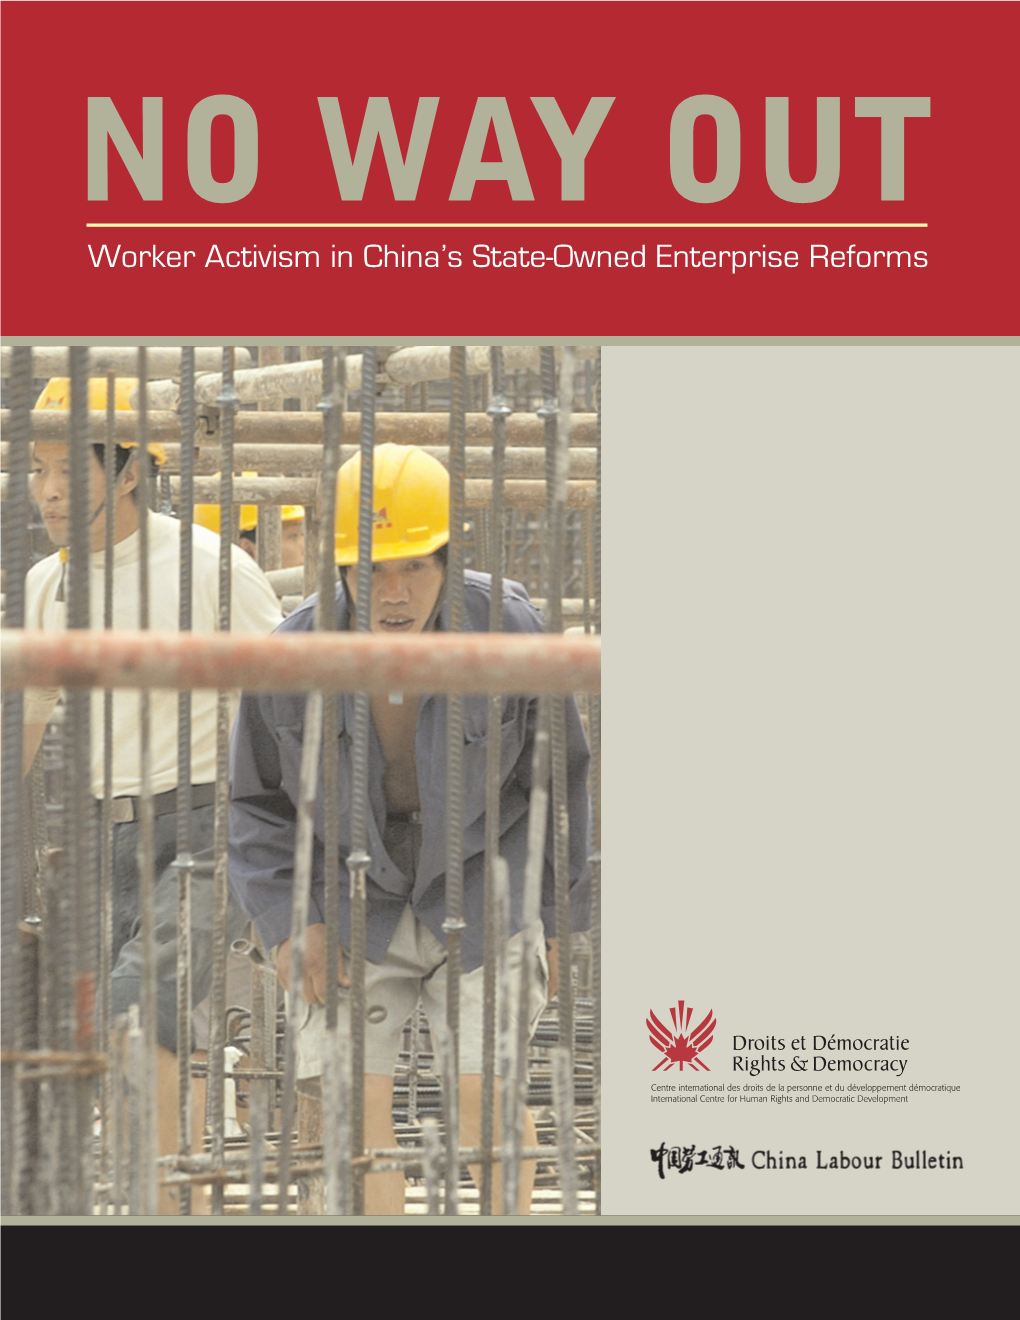 No Way Out: Worker Activism in China's State-Owned Enterprise